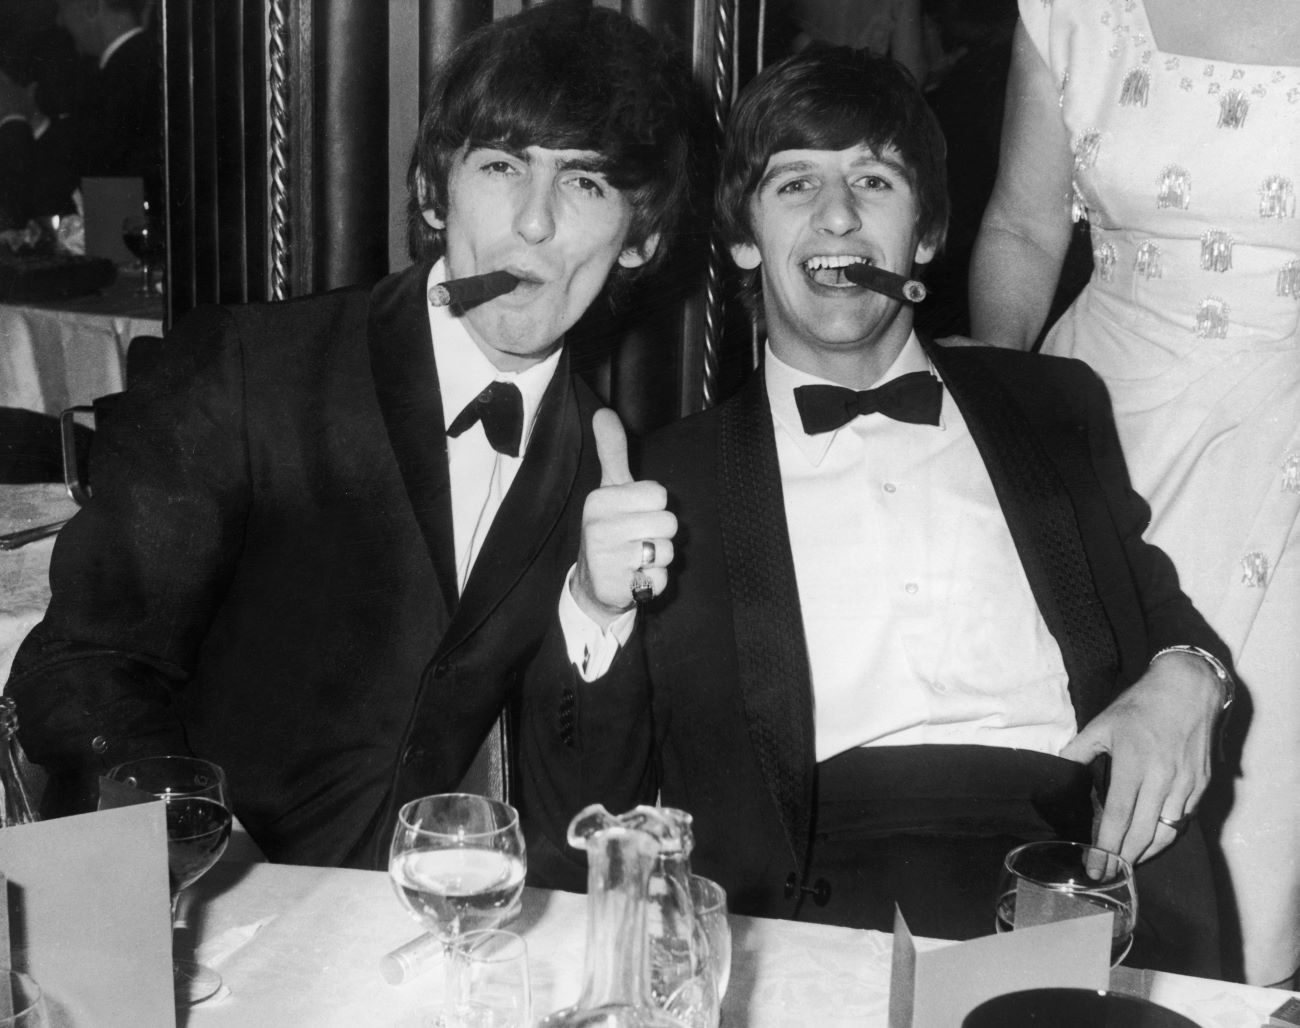 A black and white picture of George Harrison and Ringo Starr smoking cigars at a dinner table.